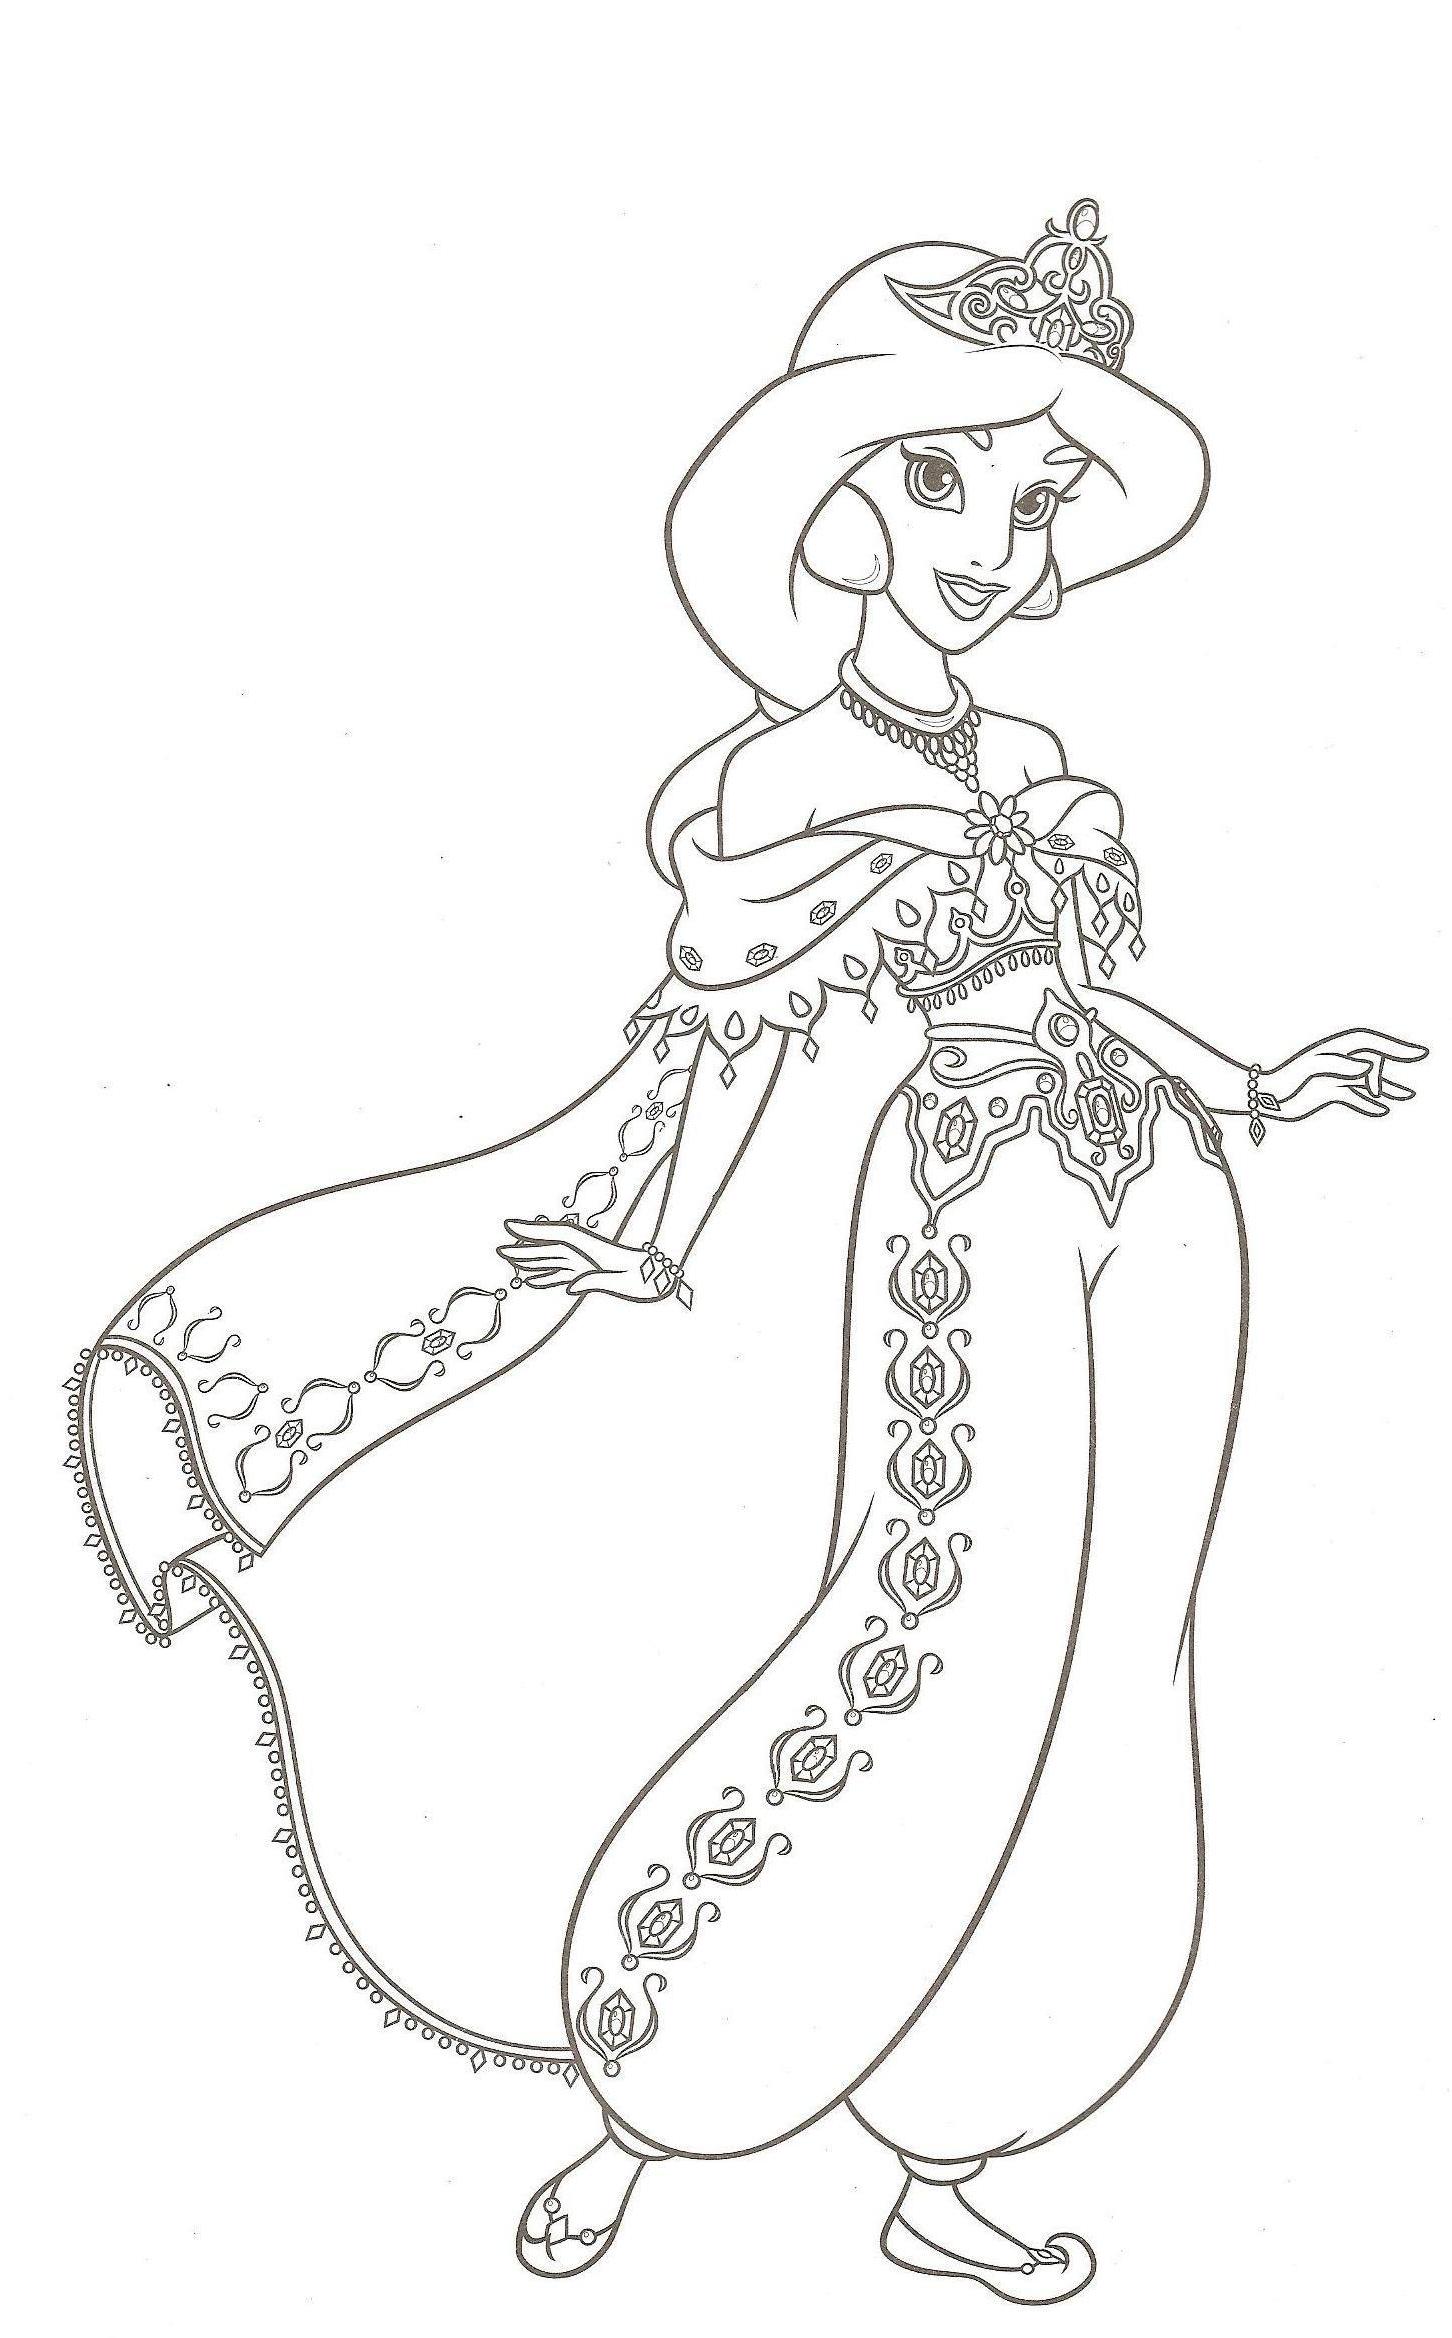 Funny Princesses coloring page